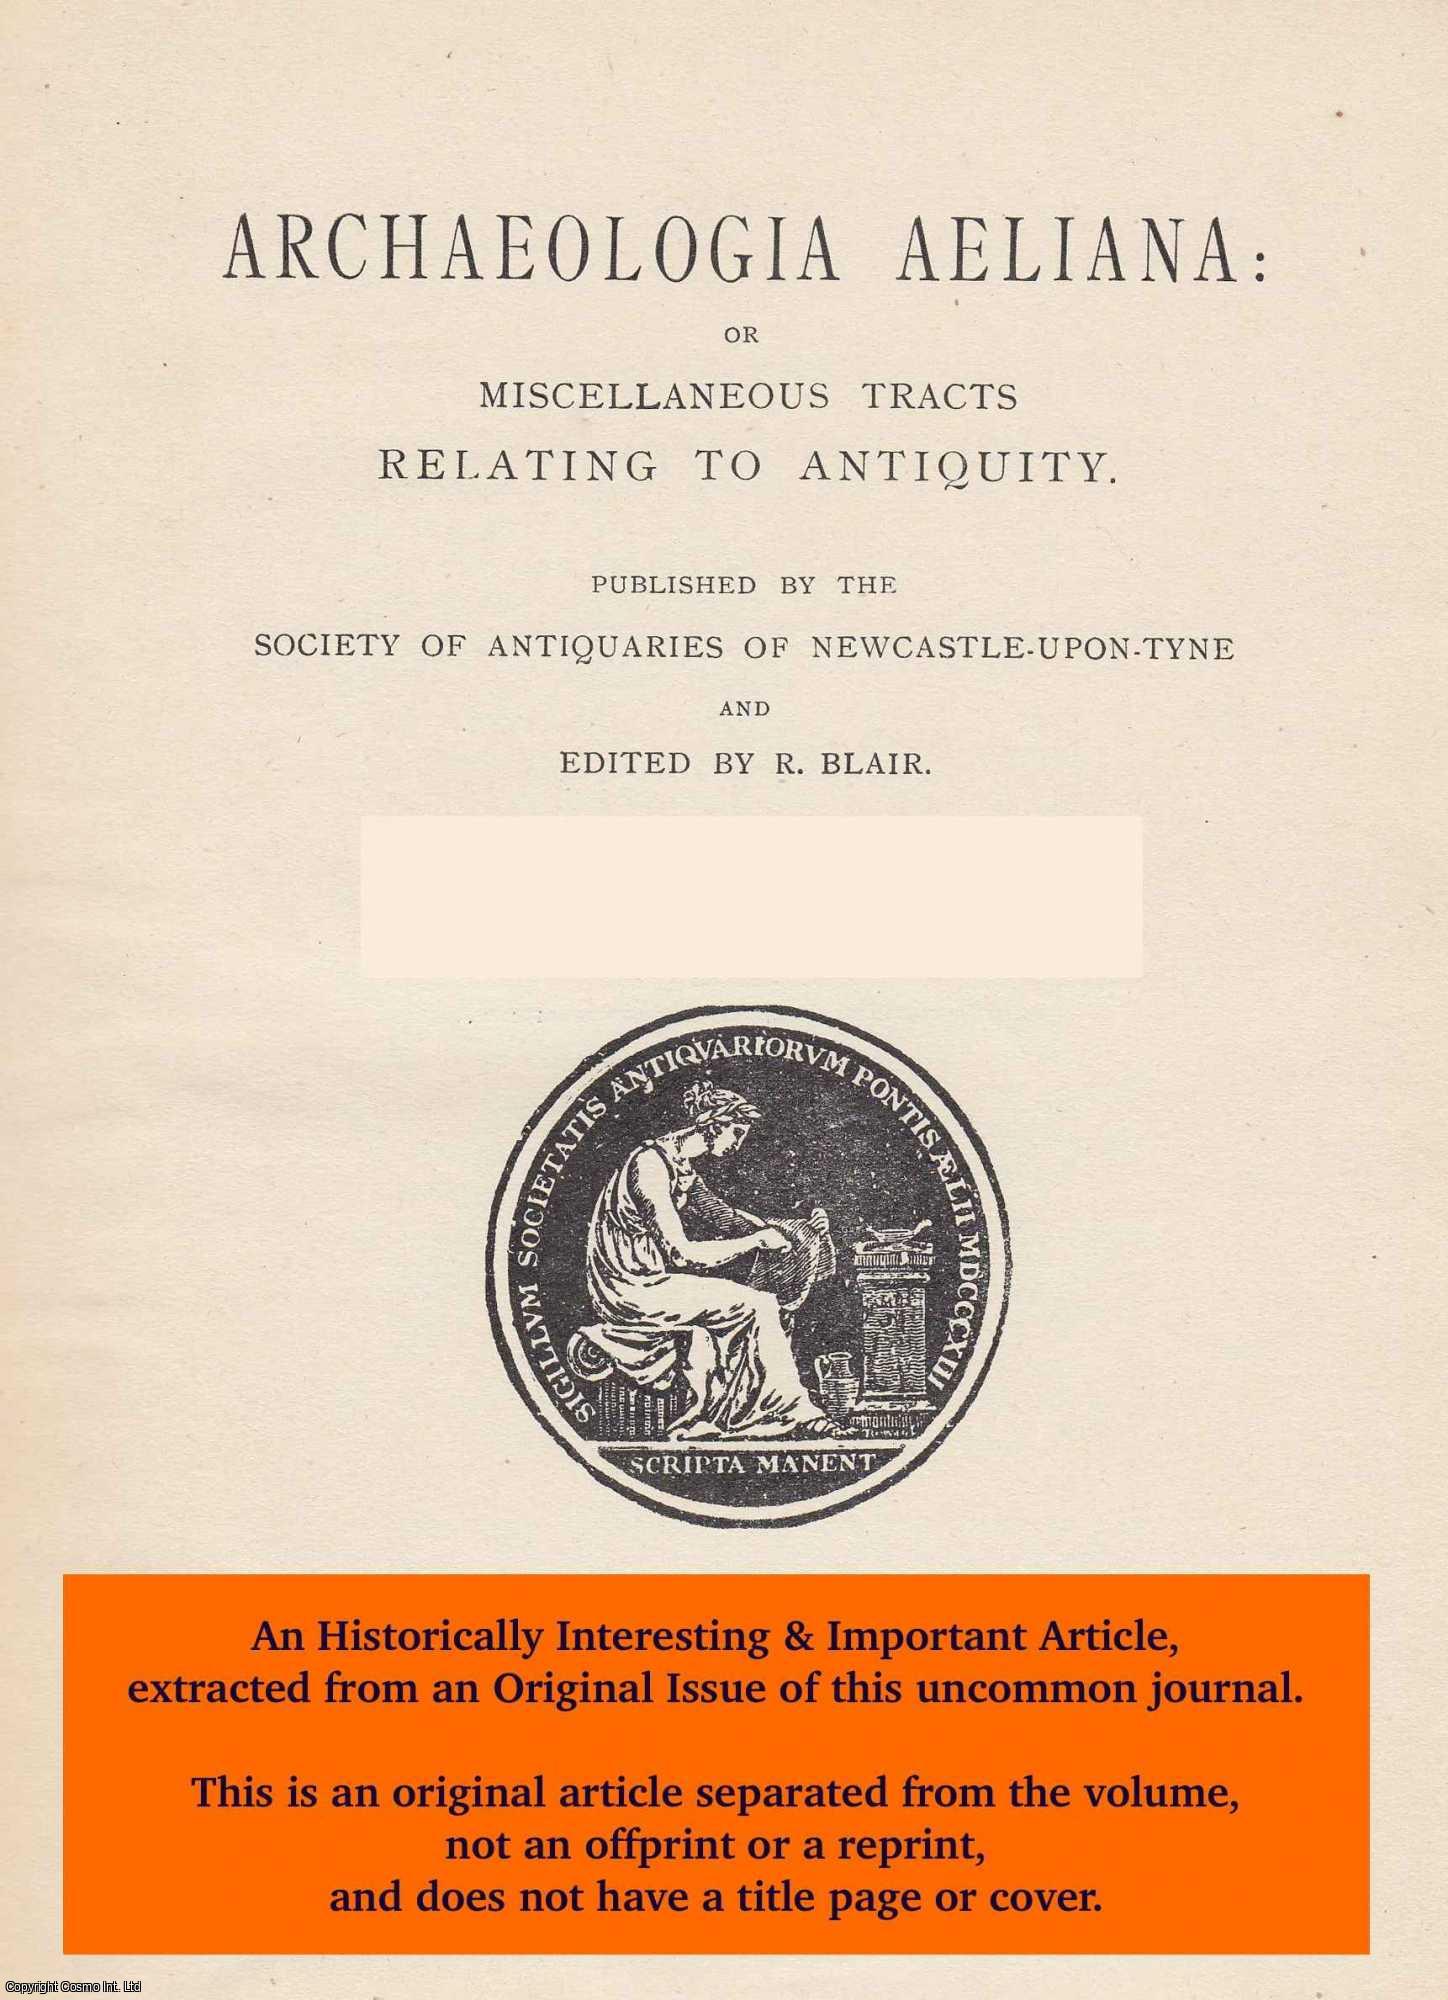 A. Hamilton Thompson, A. Hamilton - Some Architectural Characteristics of The Parish Churches of Northumberland. An original article from The Archaeologia Aeliana: or Miscellaneous Tracts Relating to Antiquity, 1921.